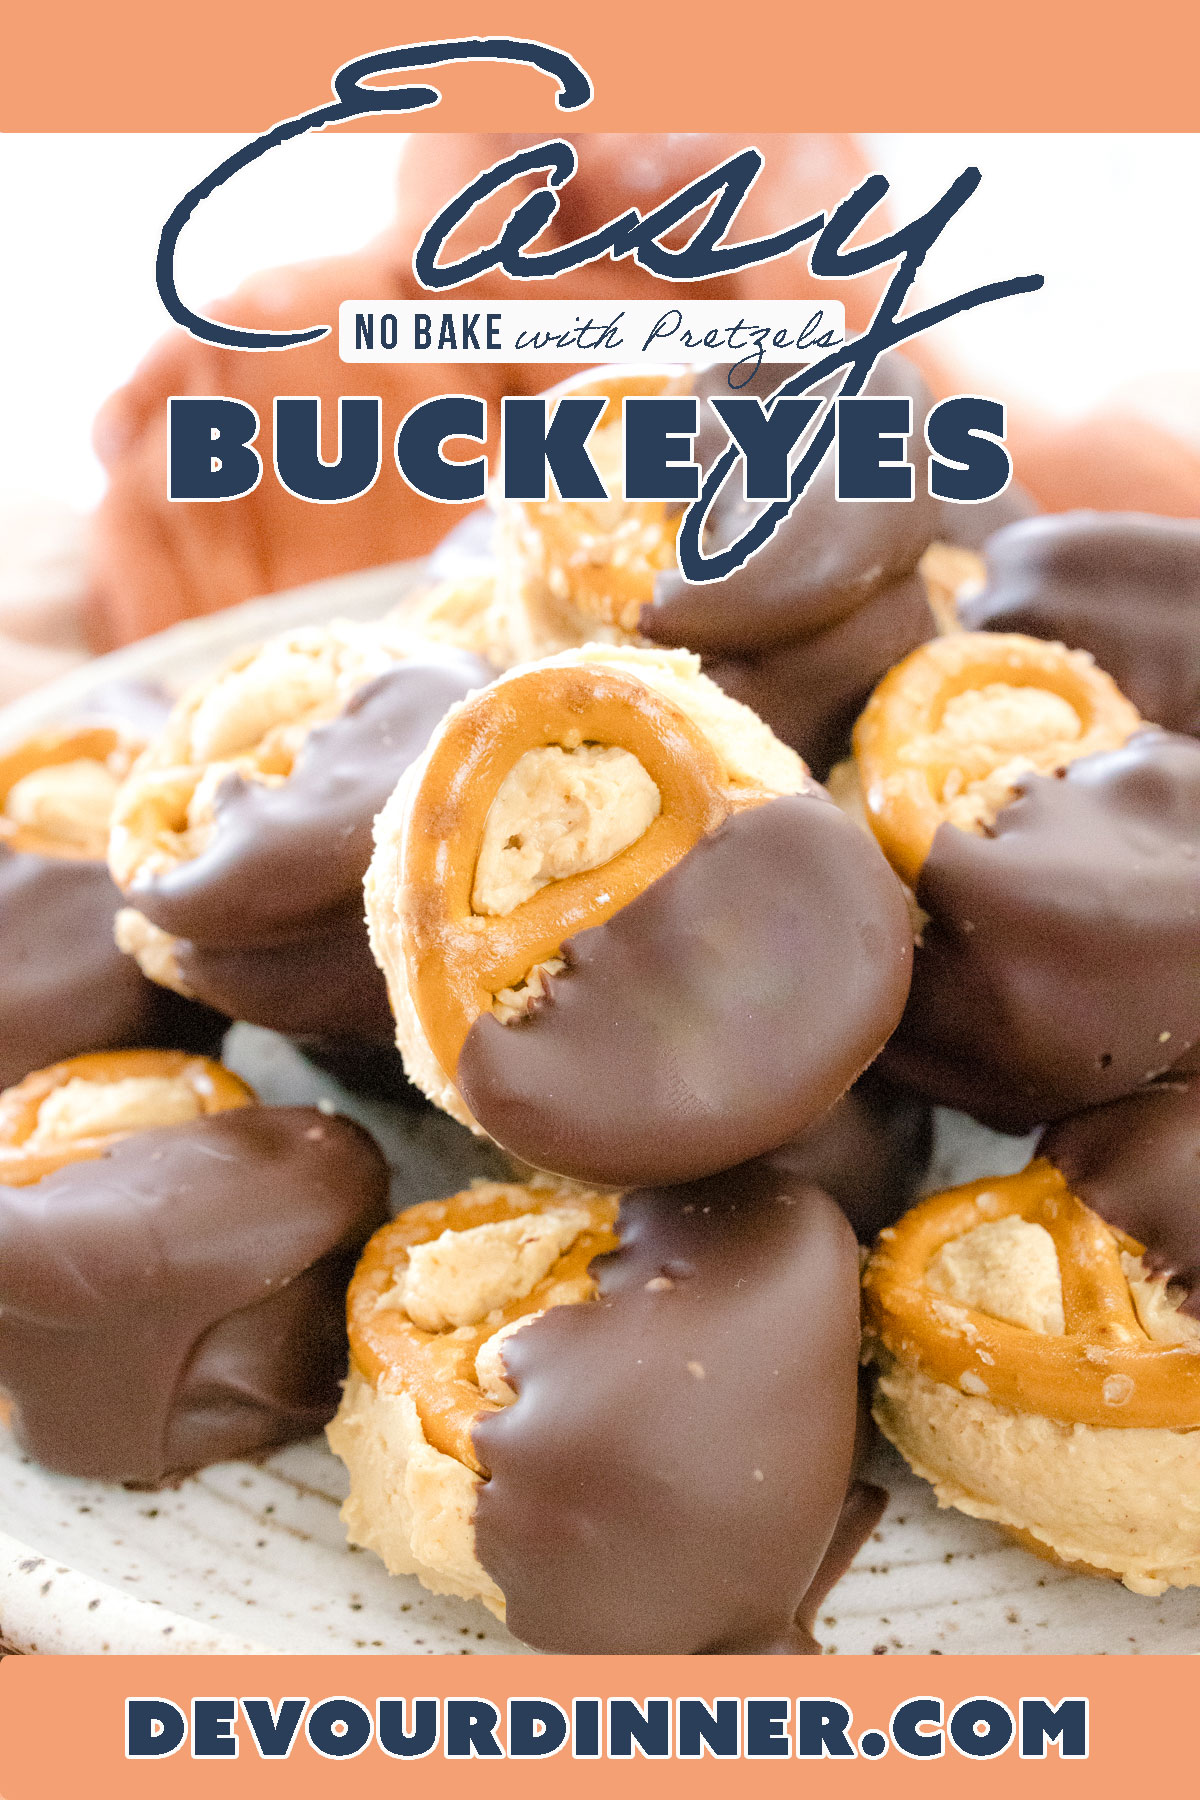 Buckeye treats is made with Peanut Butter and dipped in Chocolate. This Easy Buckeye Recipe has added Pretzels and the sweet and salty combo is amazing! This recipe is easily made by melting chocolate using your Instant Pot or pressure cooker. Curb your appetite with this sweet and salty snack! #devourdinner #easydessert #dessert #snack #easysnack #buckeye #buckeyerecipe #easybuckeyerecipe #chocolate #Peanutbutter #Reeses #chocolatepeanutbutter #recipe #recipes #food #foodie #yum #yummy